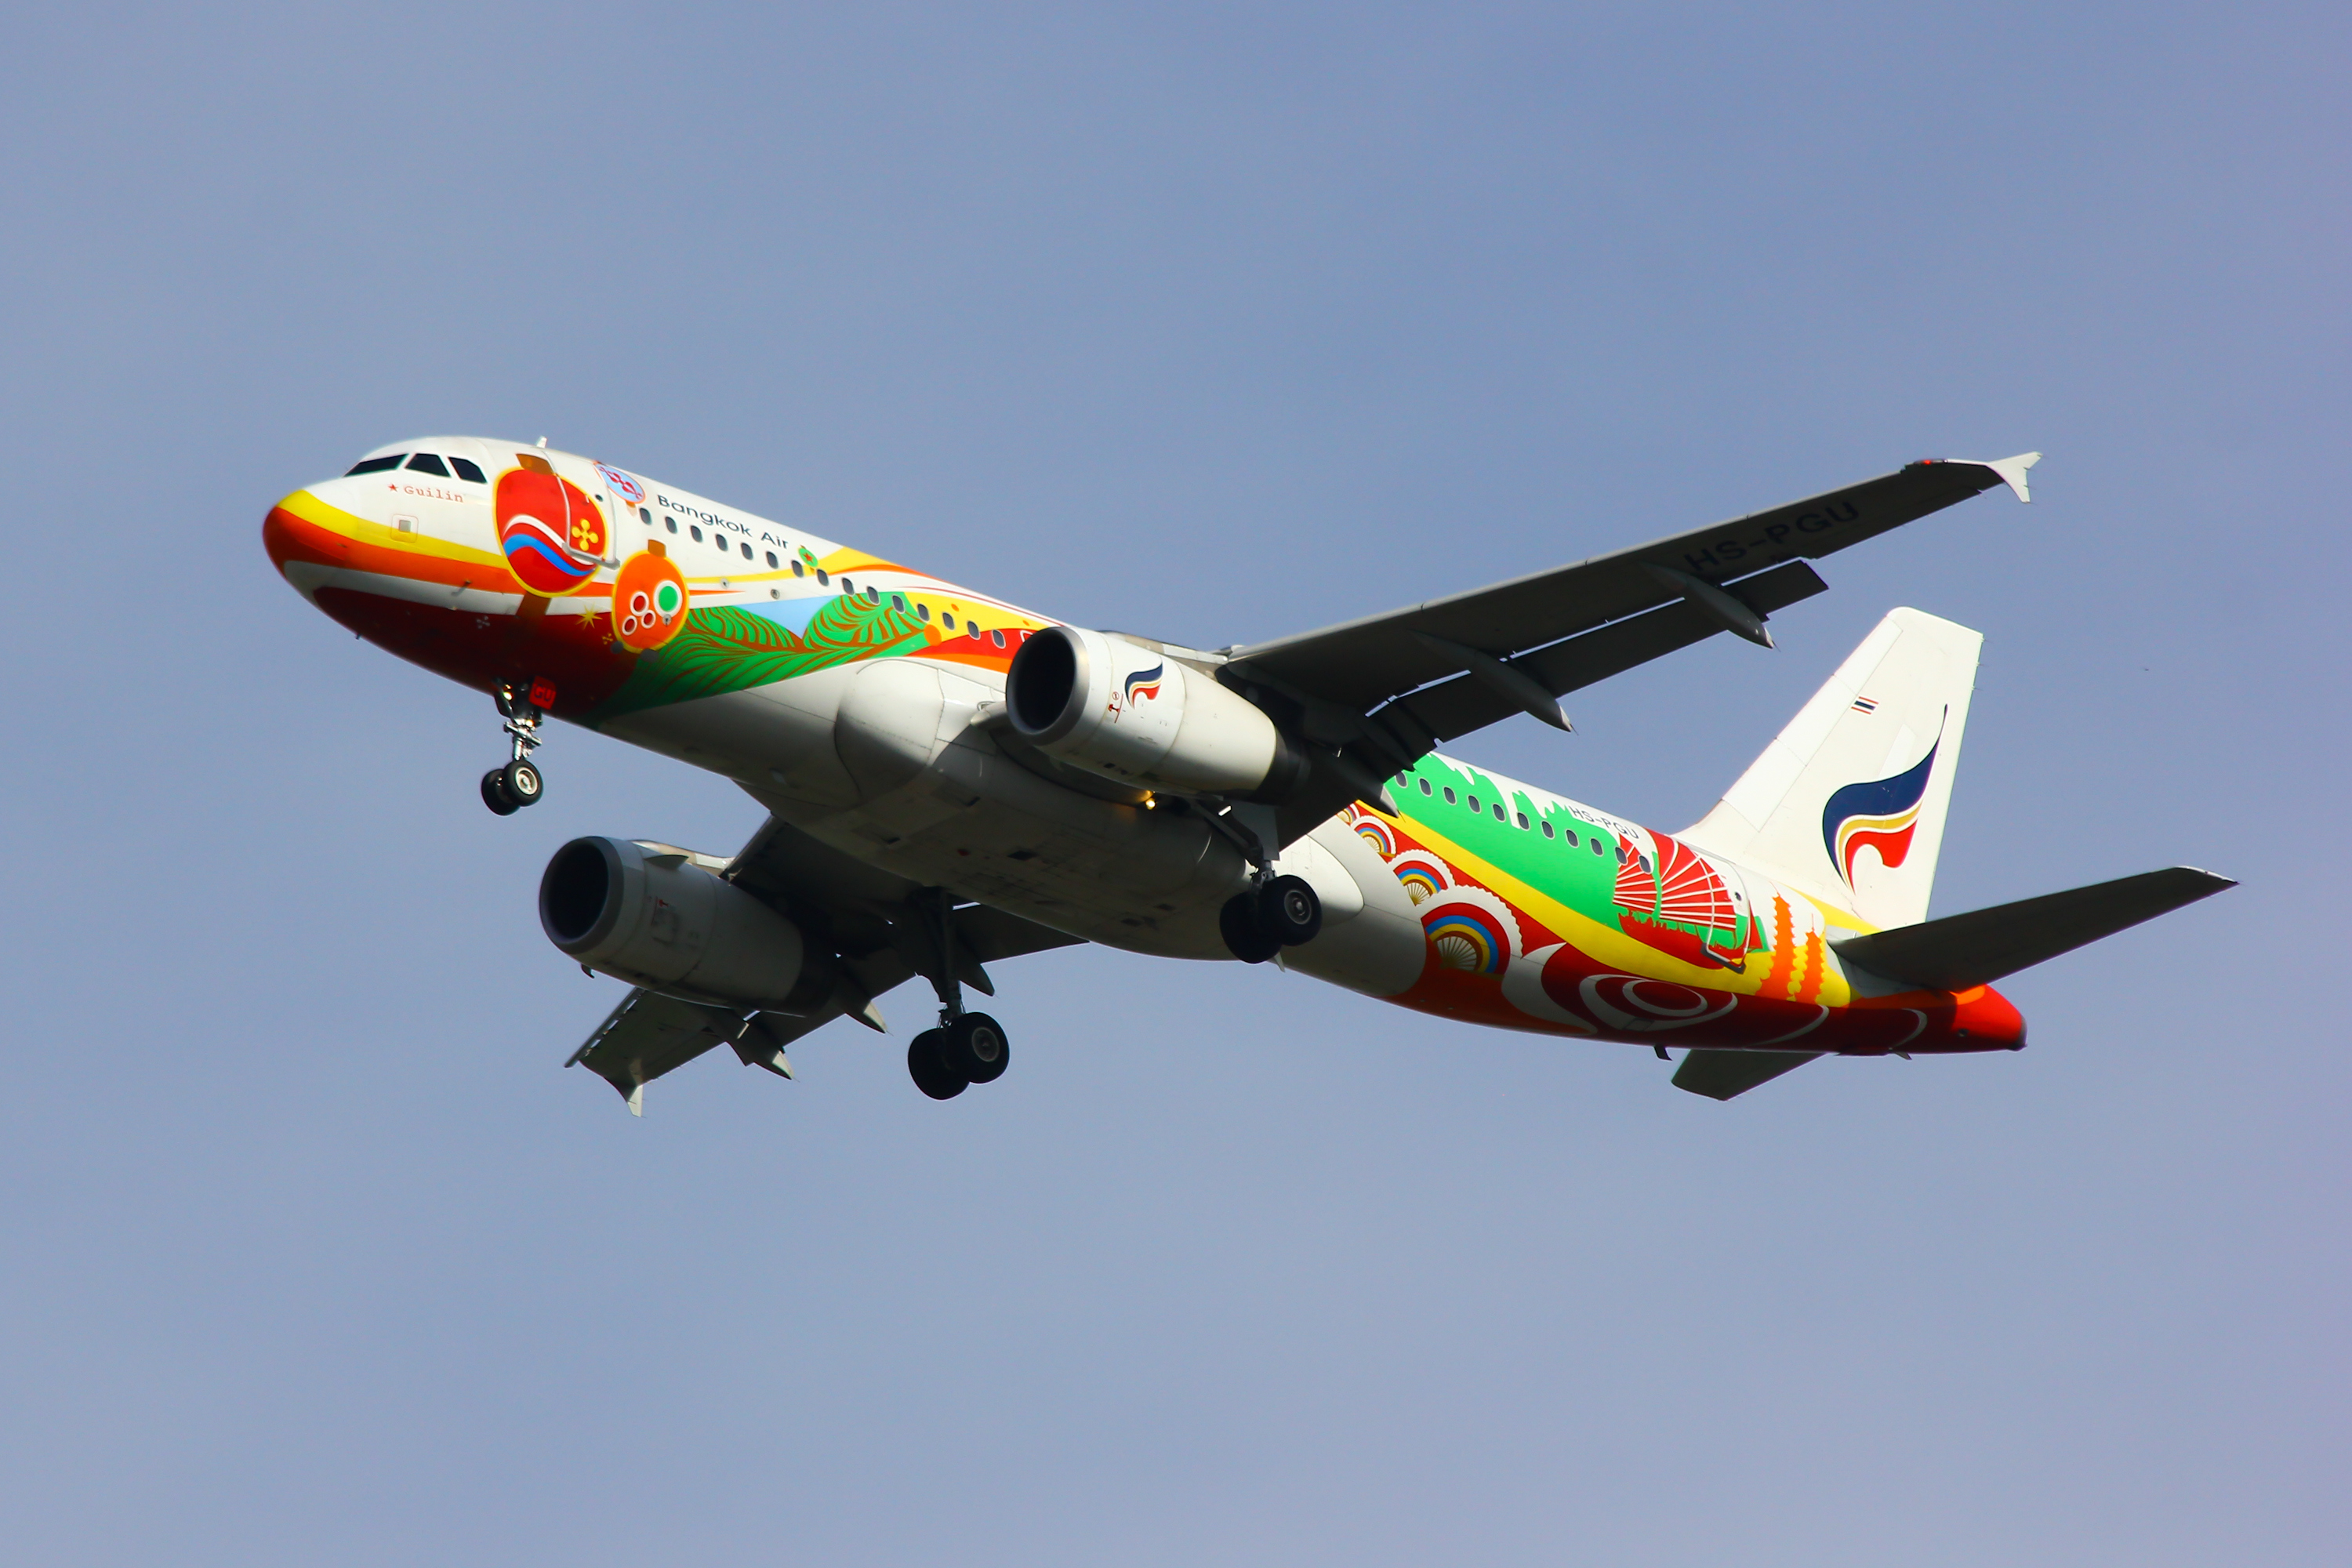 Bangkok Air airplane flying with bright artwork painted on the plane